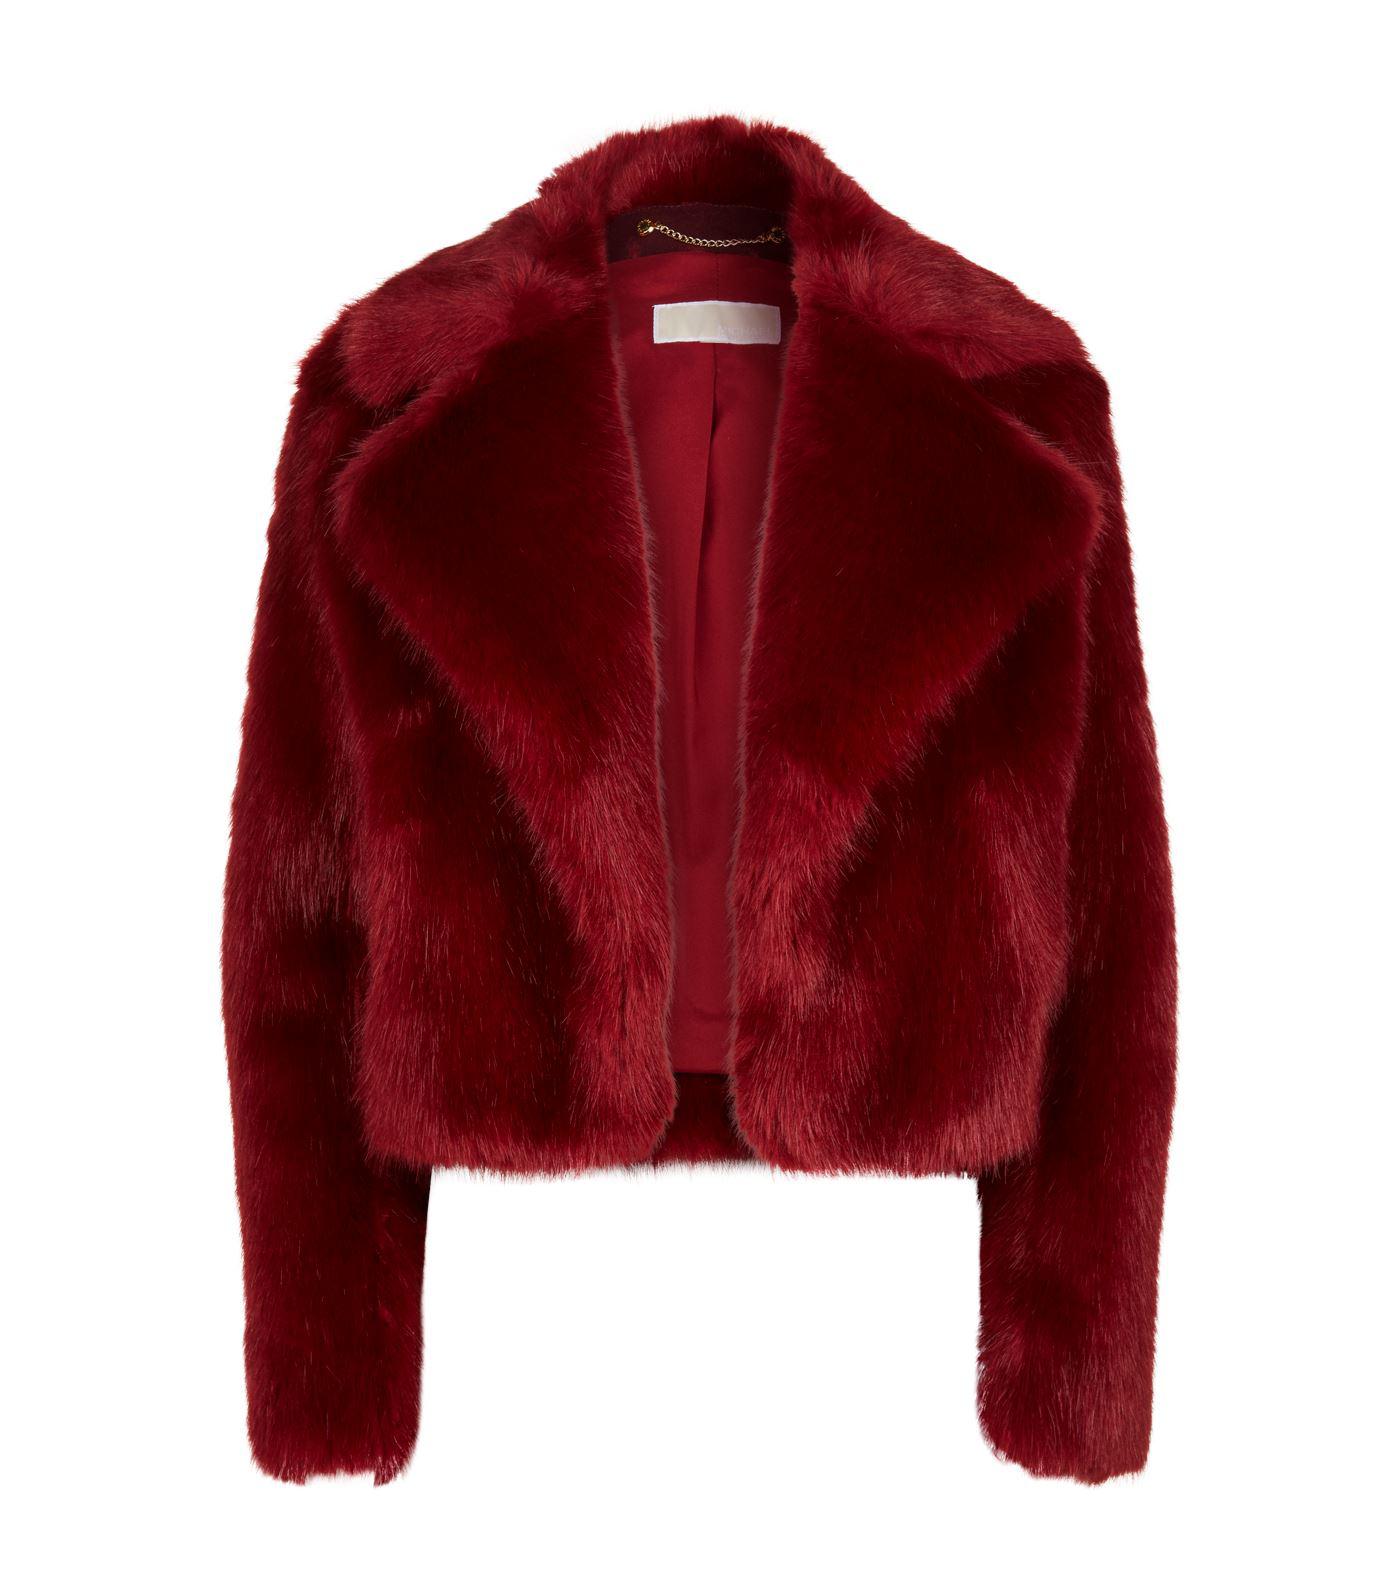 MICHAEL Michael Kors Cropped Faux Fur Jacket in Red | Lyst